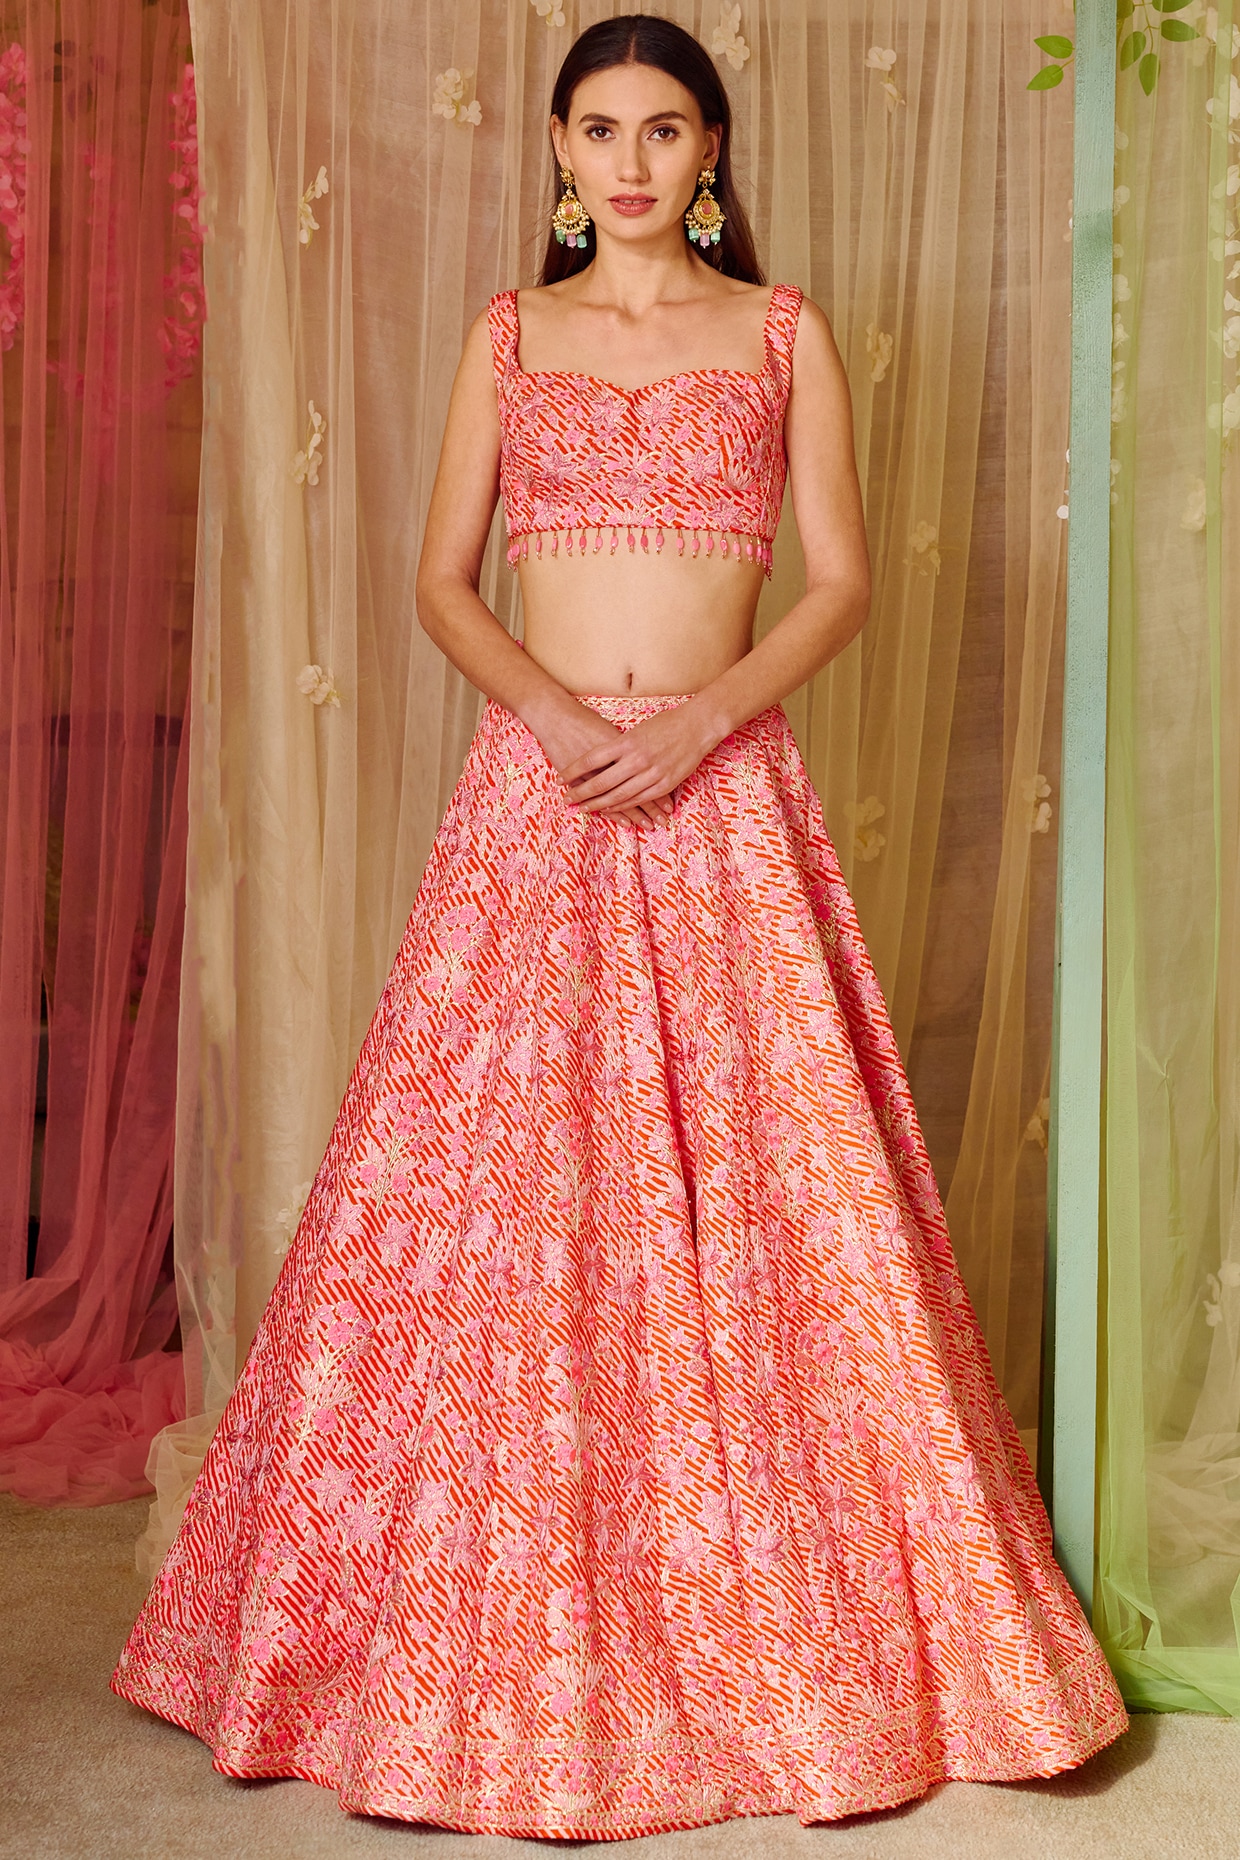 20 New Lehenga Colors For The 2020/2021 Brides! | Bridal outfits, Dresses  for mehndi function, Lehenga color combinations